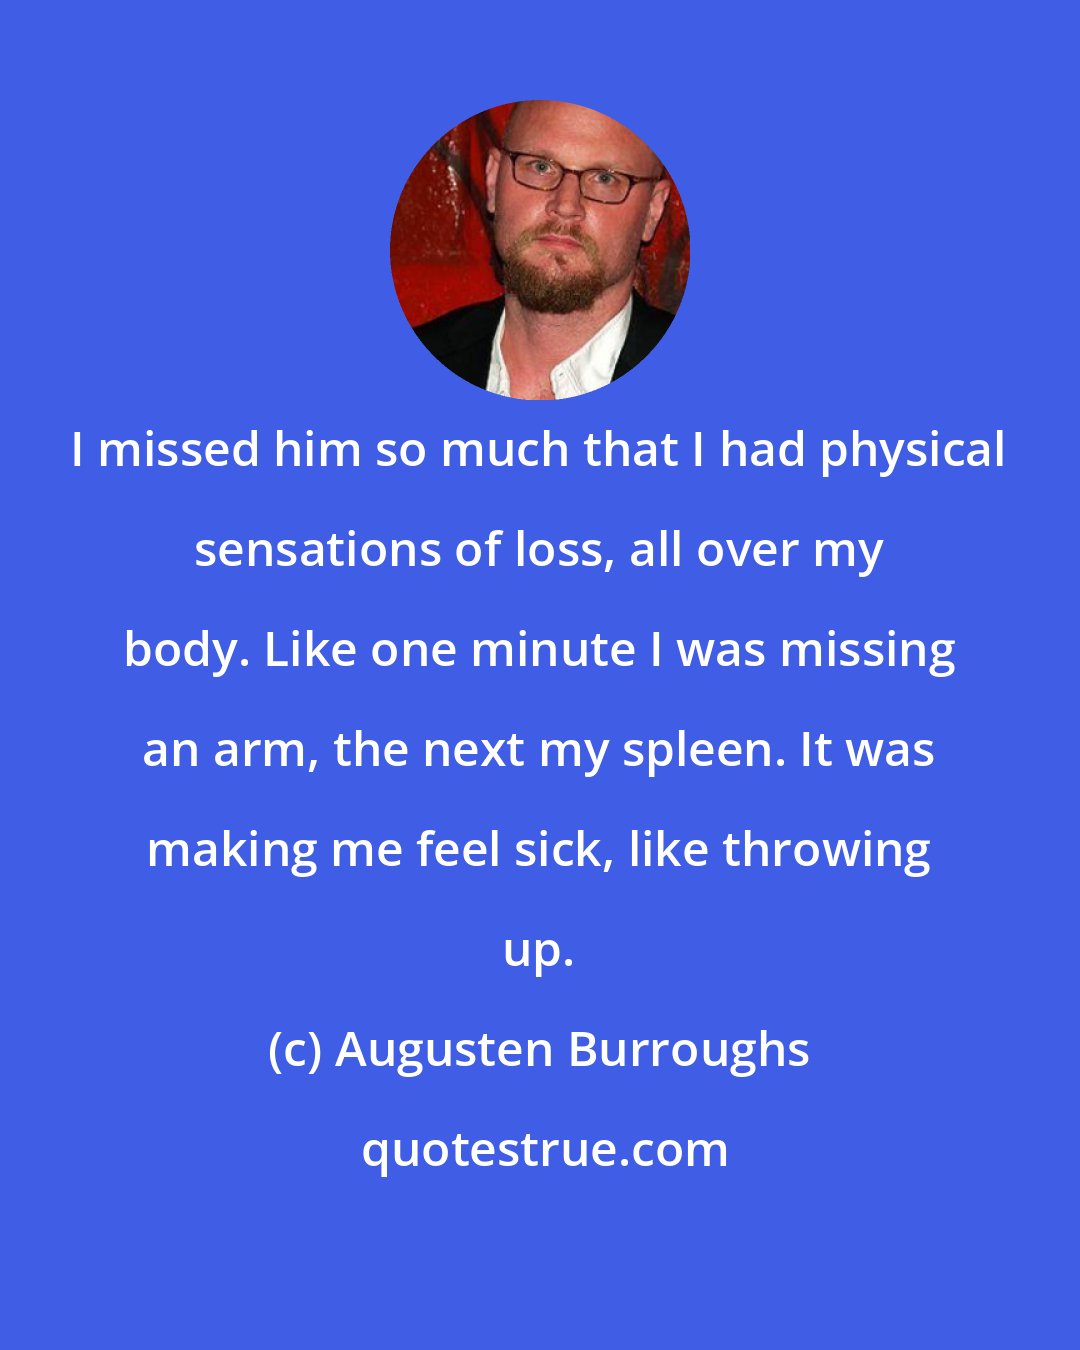 Augusten Burroughs: I missed him so much that I had physical sensations of loss, all over my body. Like one minute I was missing an arm, the next my spleen. It was making me feel sick, like throwing up.